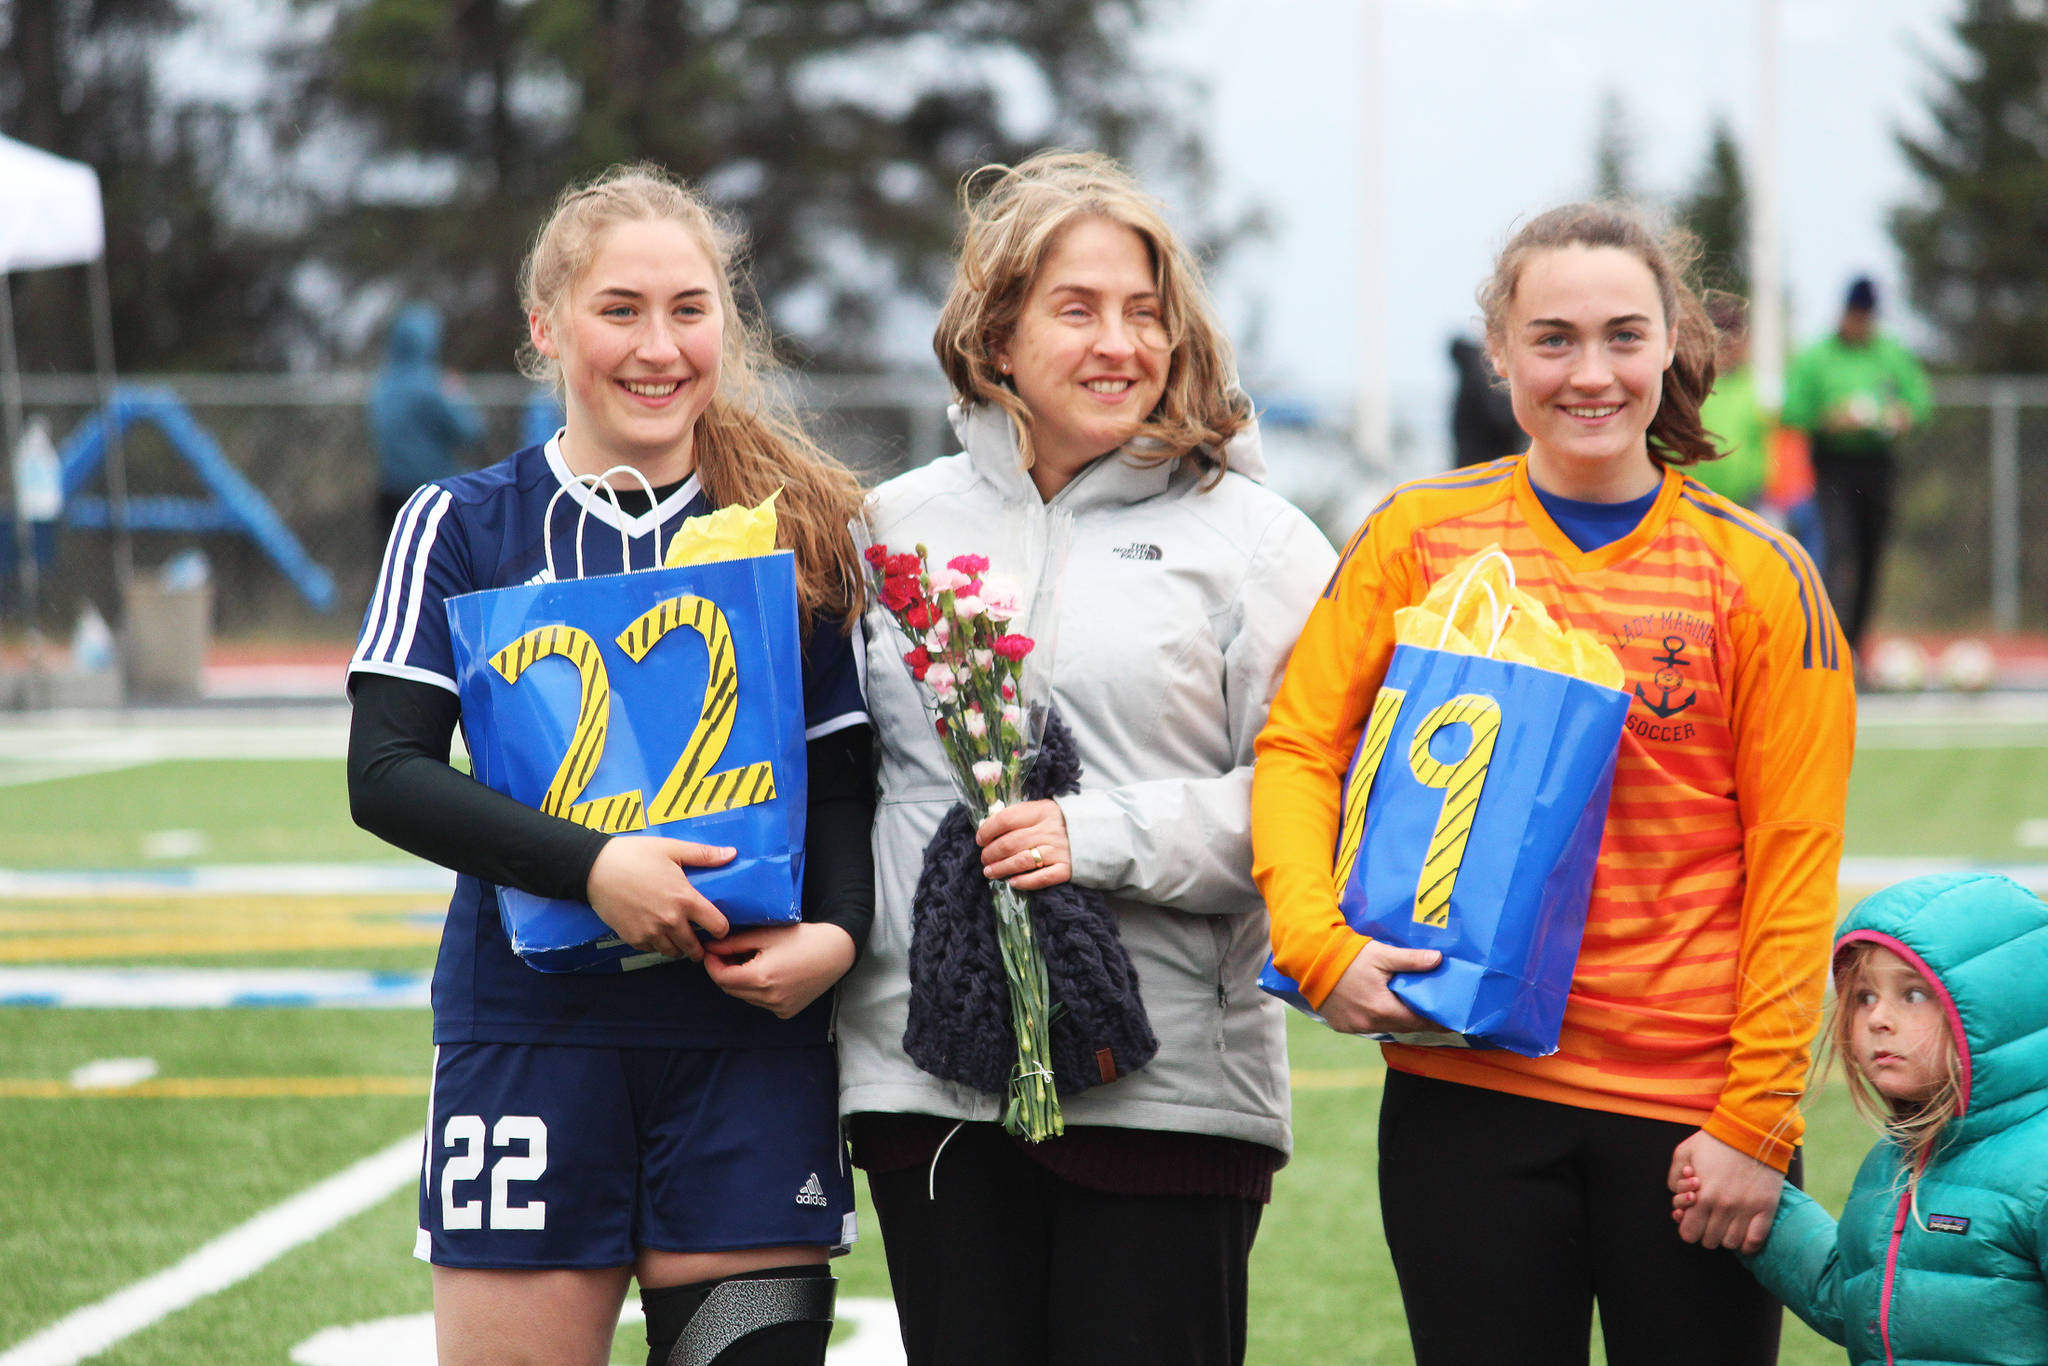 Brenna (left) and Alison (right) McCarron stand with their family members to be recognized on Senior Night between the boys and girls soccer games against Thunder Mountain on Friday, May 10, 2019 at Homer High School in Homer, Alaska. (Photo by Megan Pacer/Homer News)